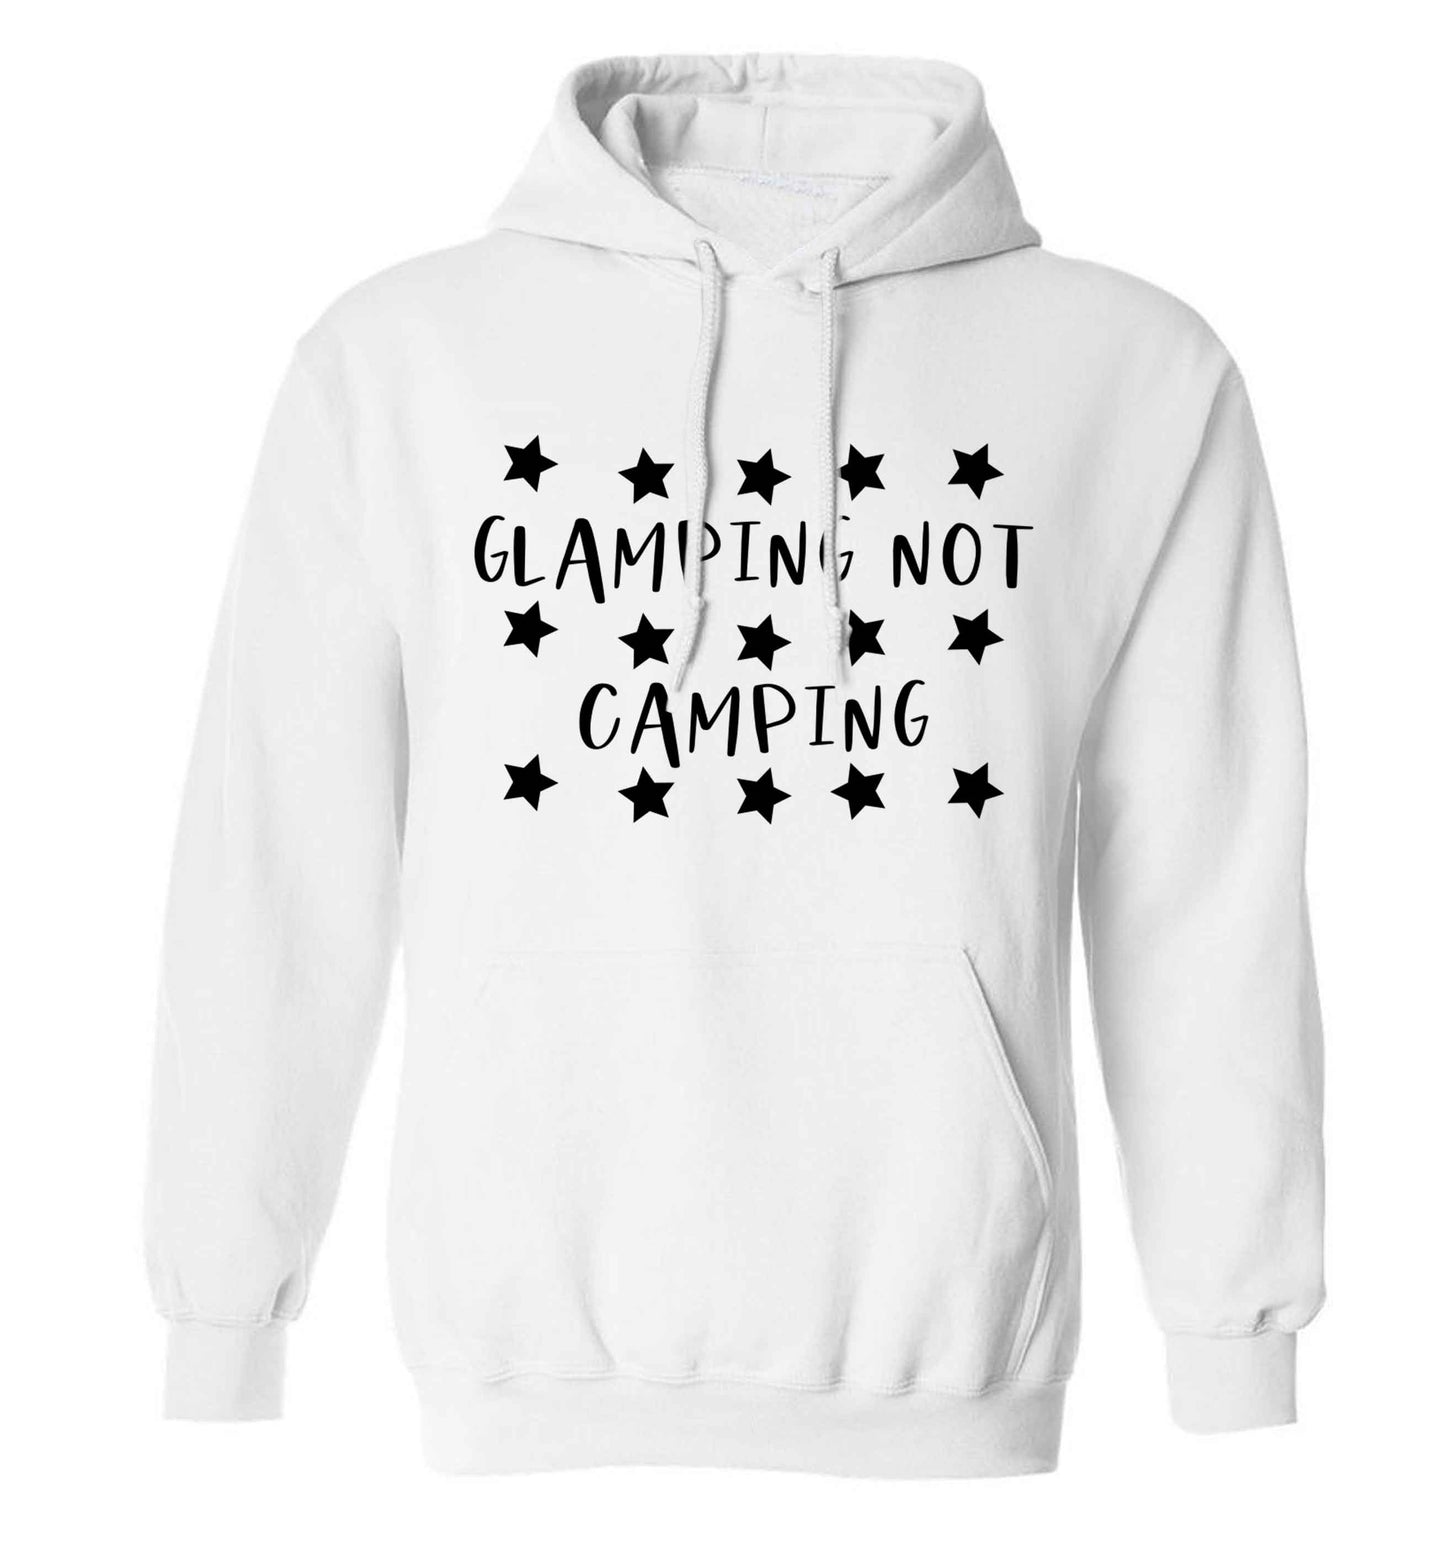 Glamping not camping adults unisex white hoodie 2XL